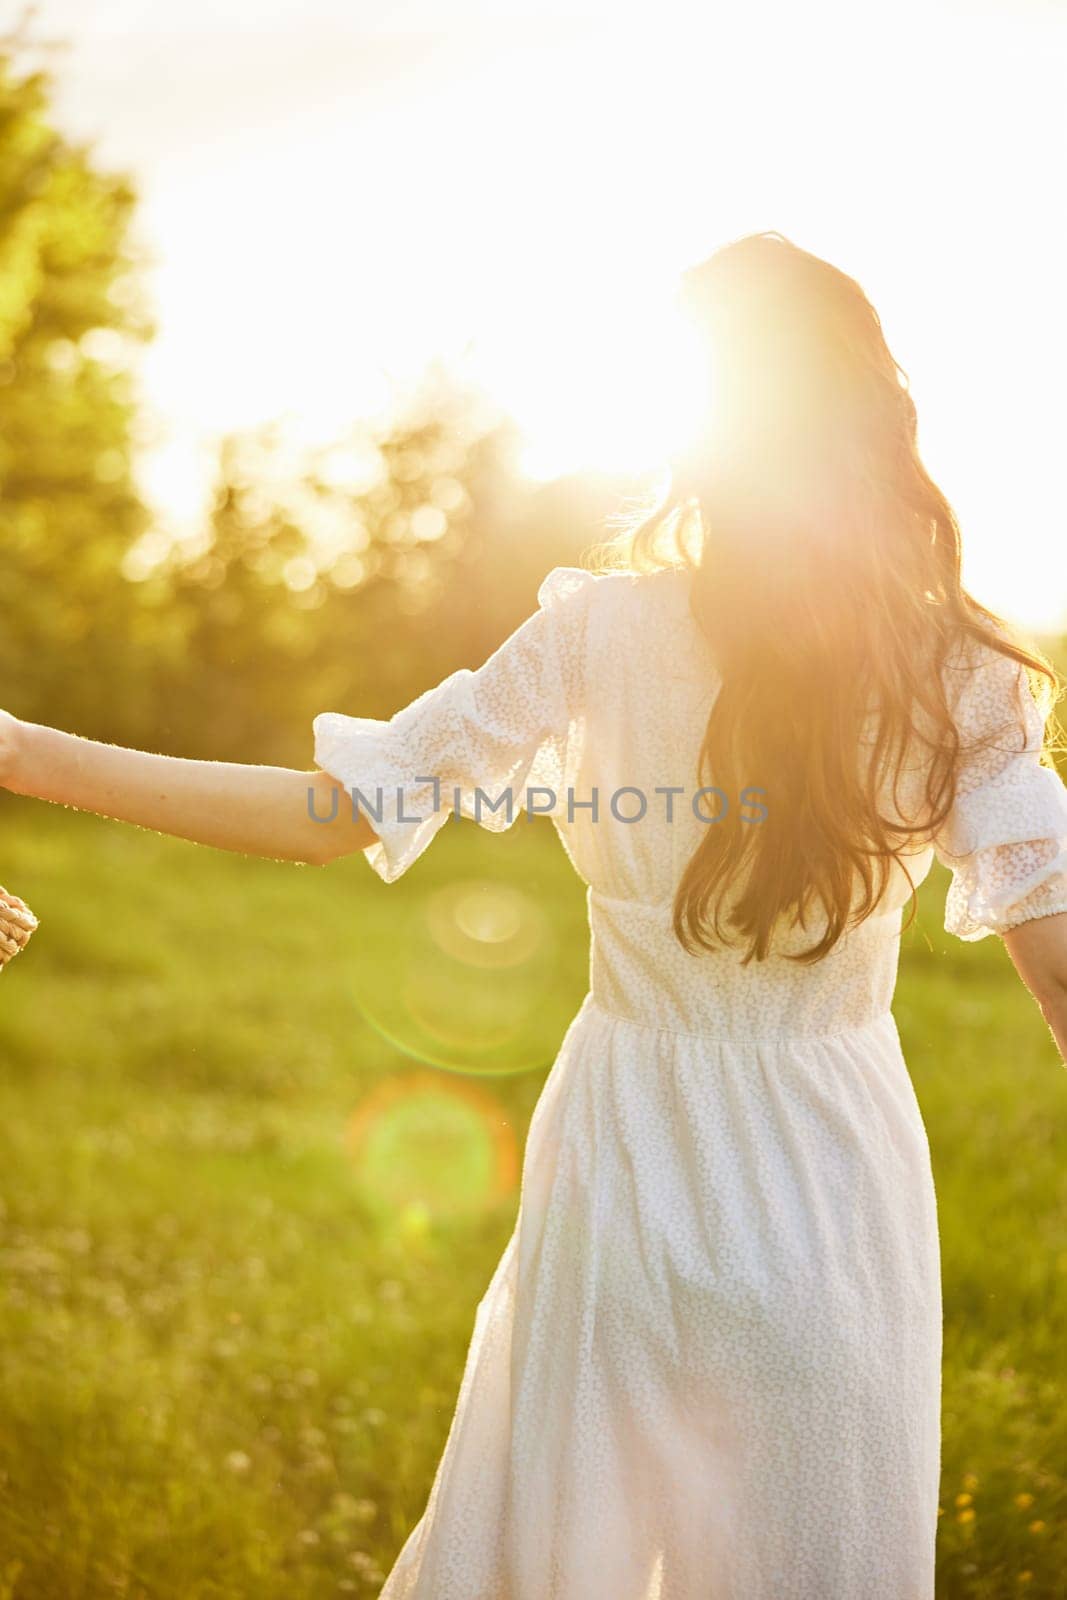 close up photo of a silhouette of a girl in a light dress standing with her back to the camera in a chamomile field during sunset. High quality photo